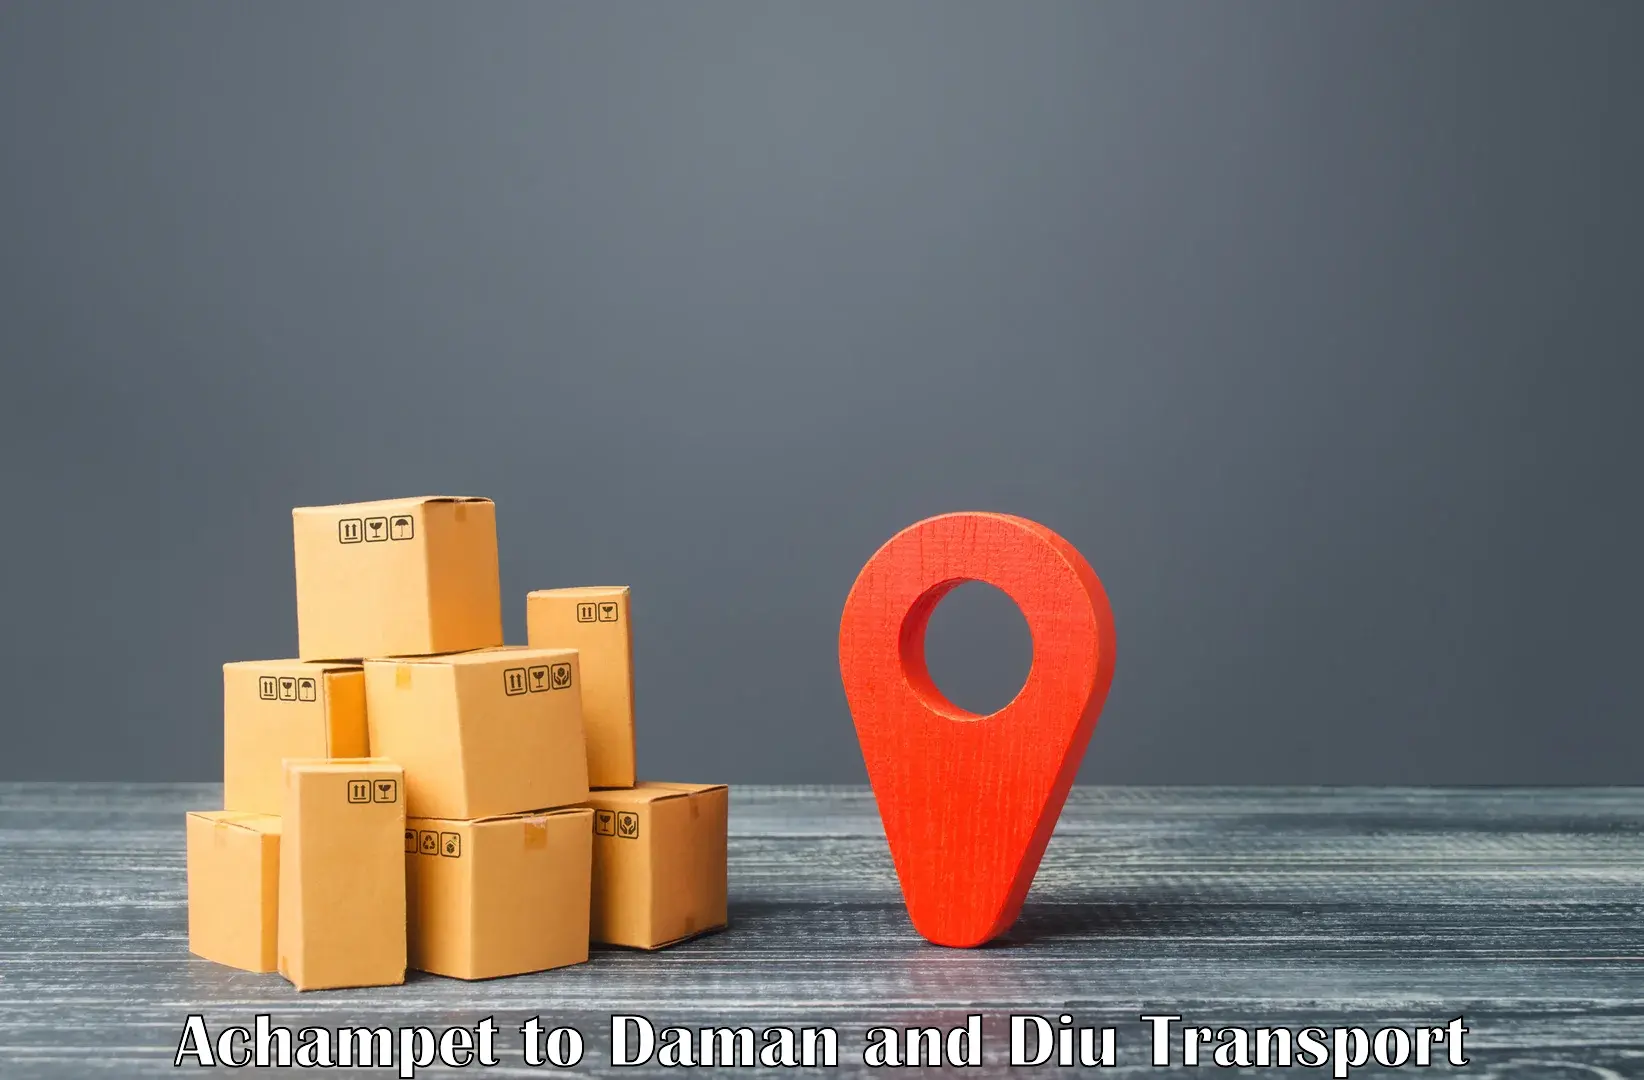 Express transport services Achampet to Diu